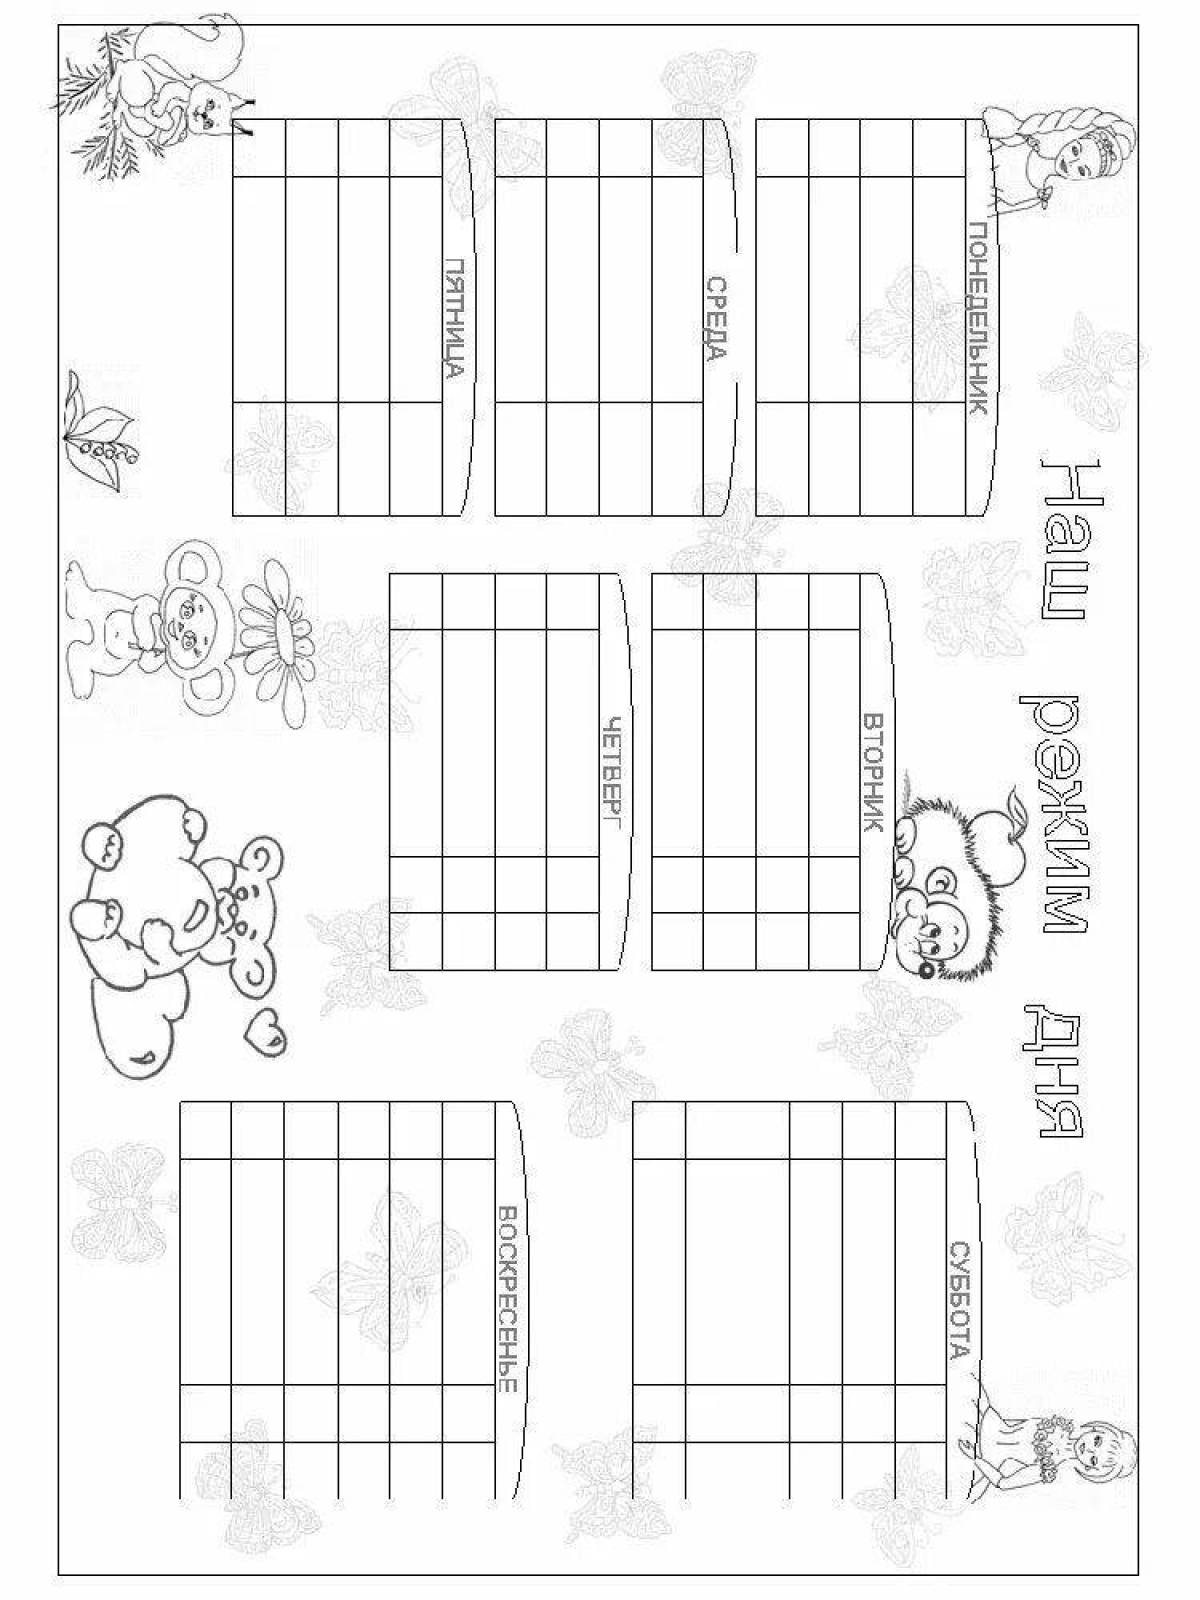 Color-grouped coloring template for 2nd grade students